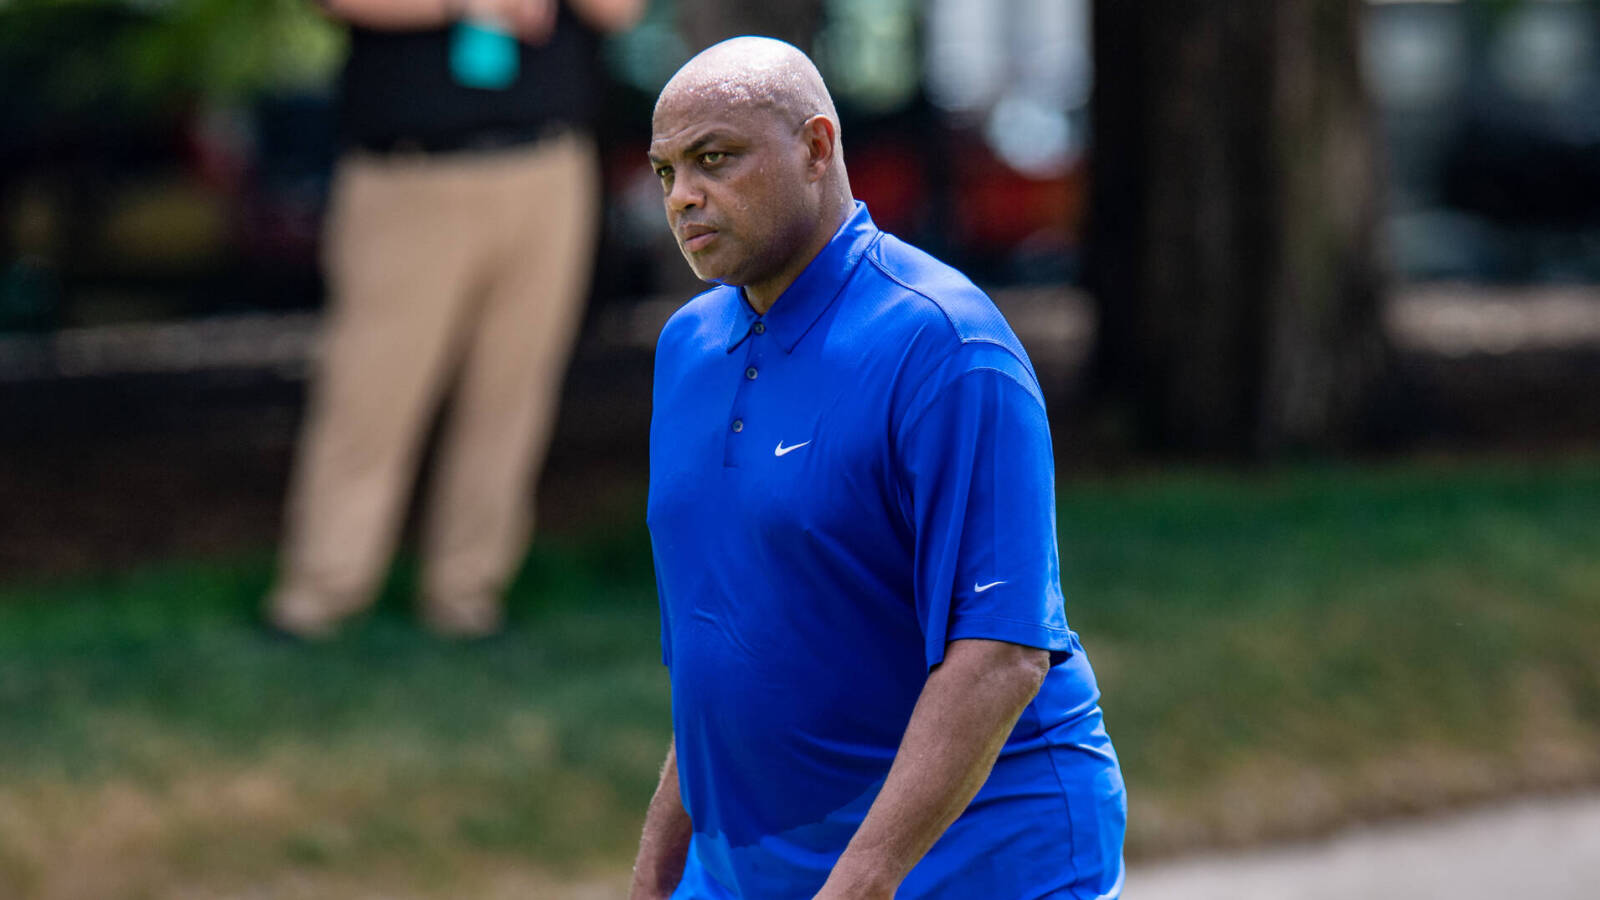 Charles Barkley ends talks with LIV Golf, will return to TNT